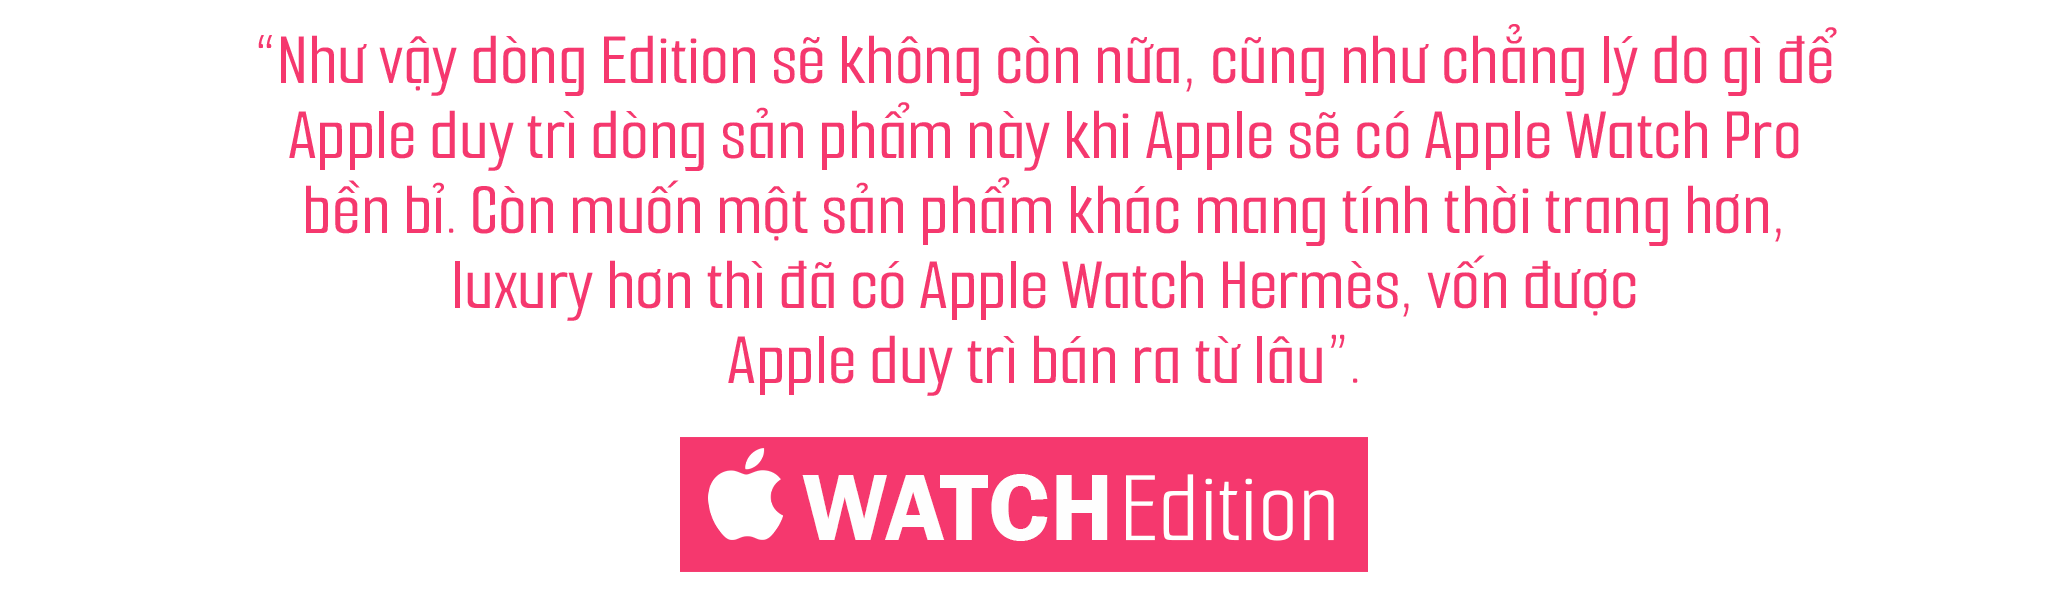 applewatch_quote_12.png